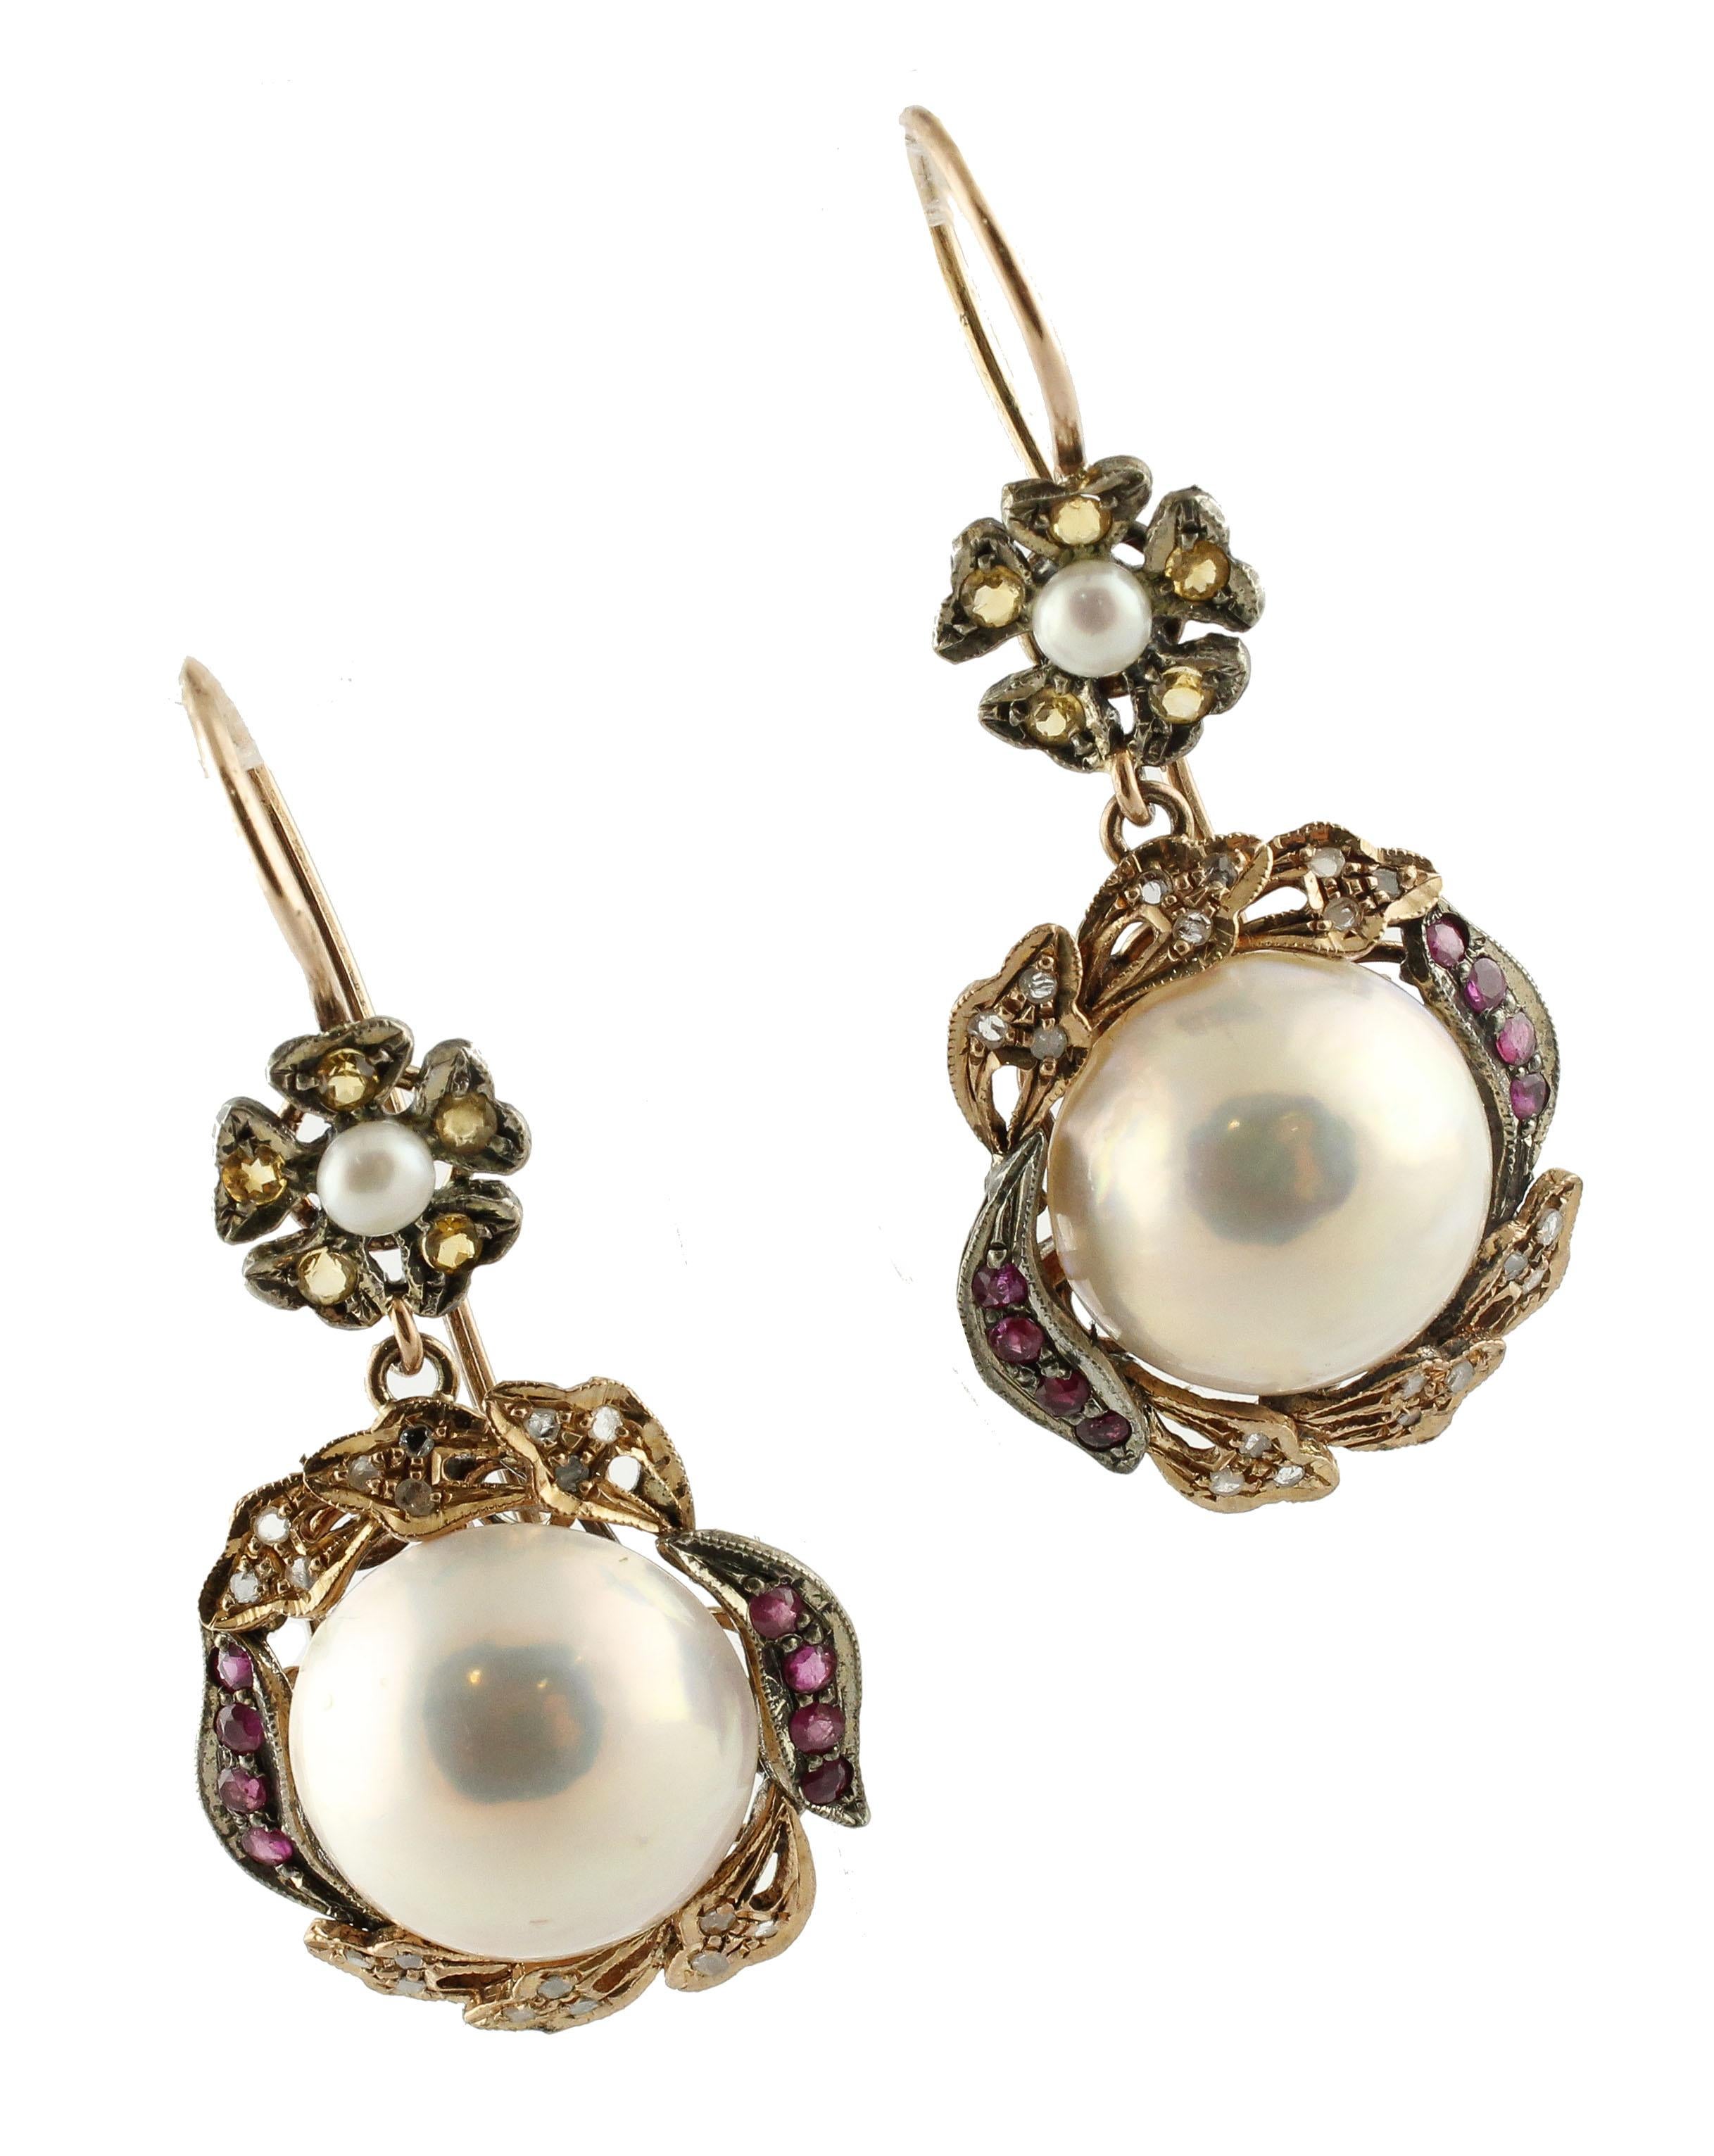 Amazing 9K rose gold and silver drop earrings composed of 4.20 g of glossy pearls surrounded by leaves detailes studded by 0.22 ct rose cut diamonds and  rubies and small flowers at the top adorned by  yellow sapphires and small pearls in the